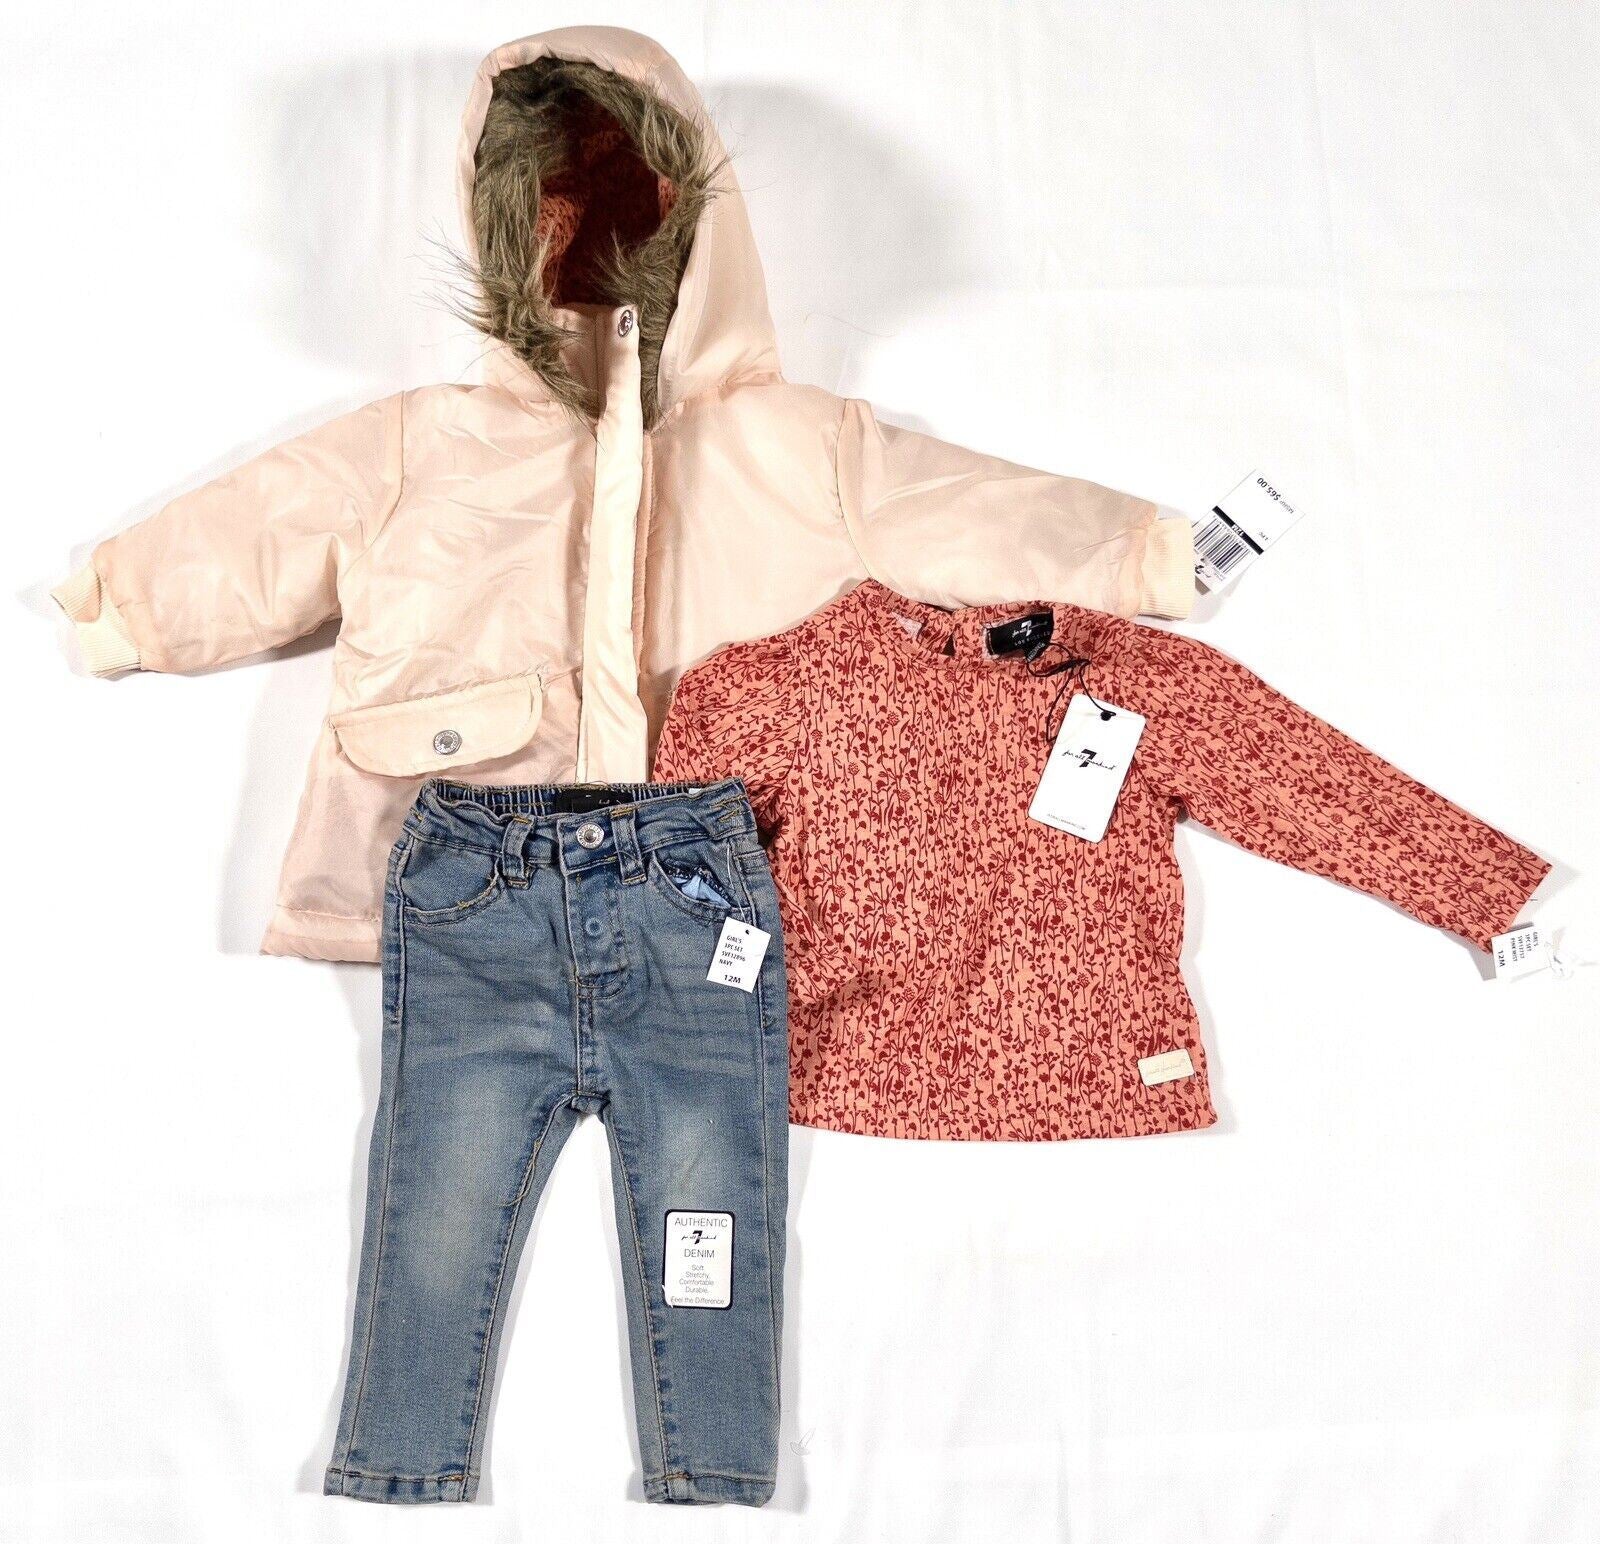 7 FOR ALL MANKIND Infant Girls 3 piece set Pink Coat Top Jeans Size UK 12 Months